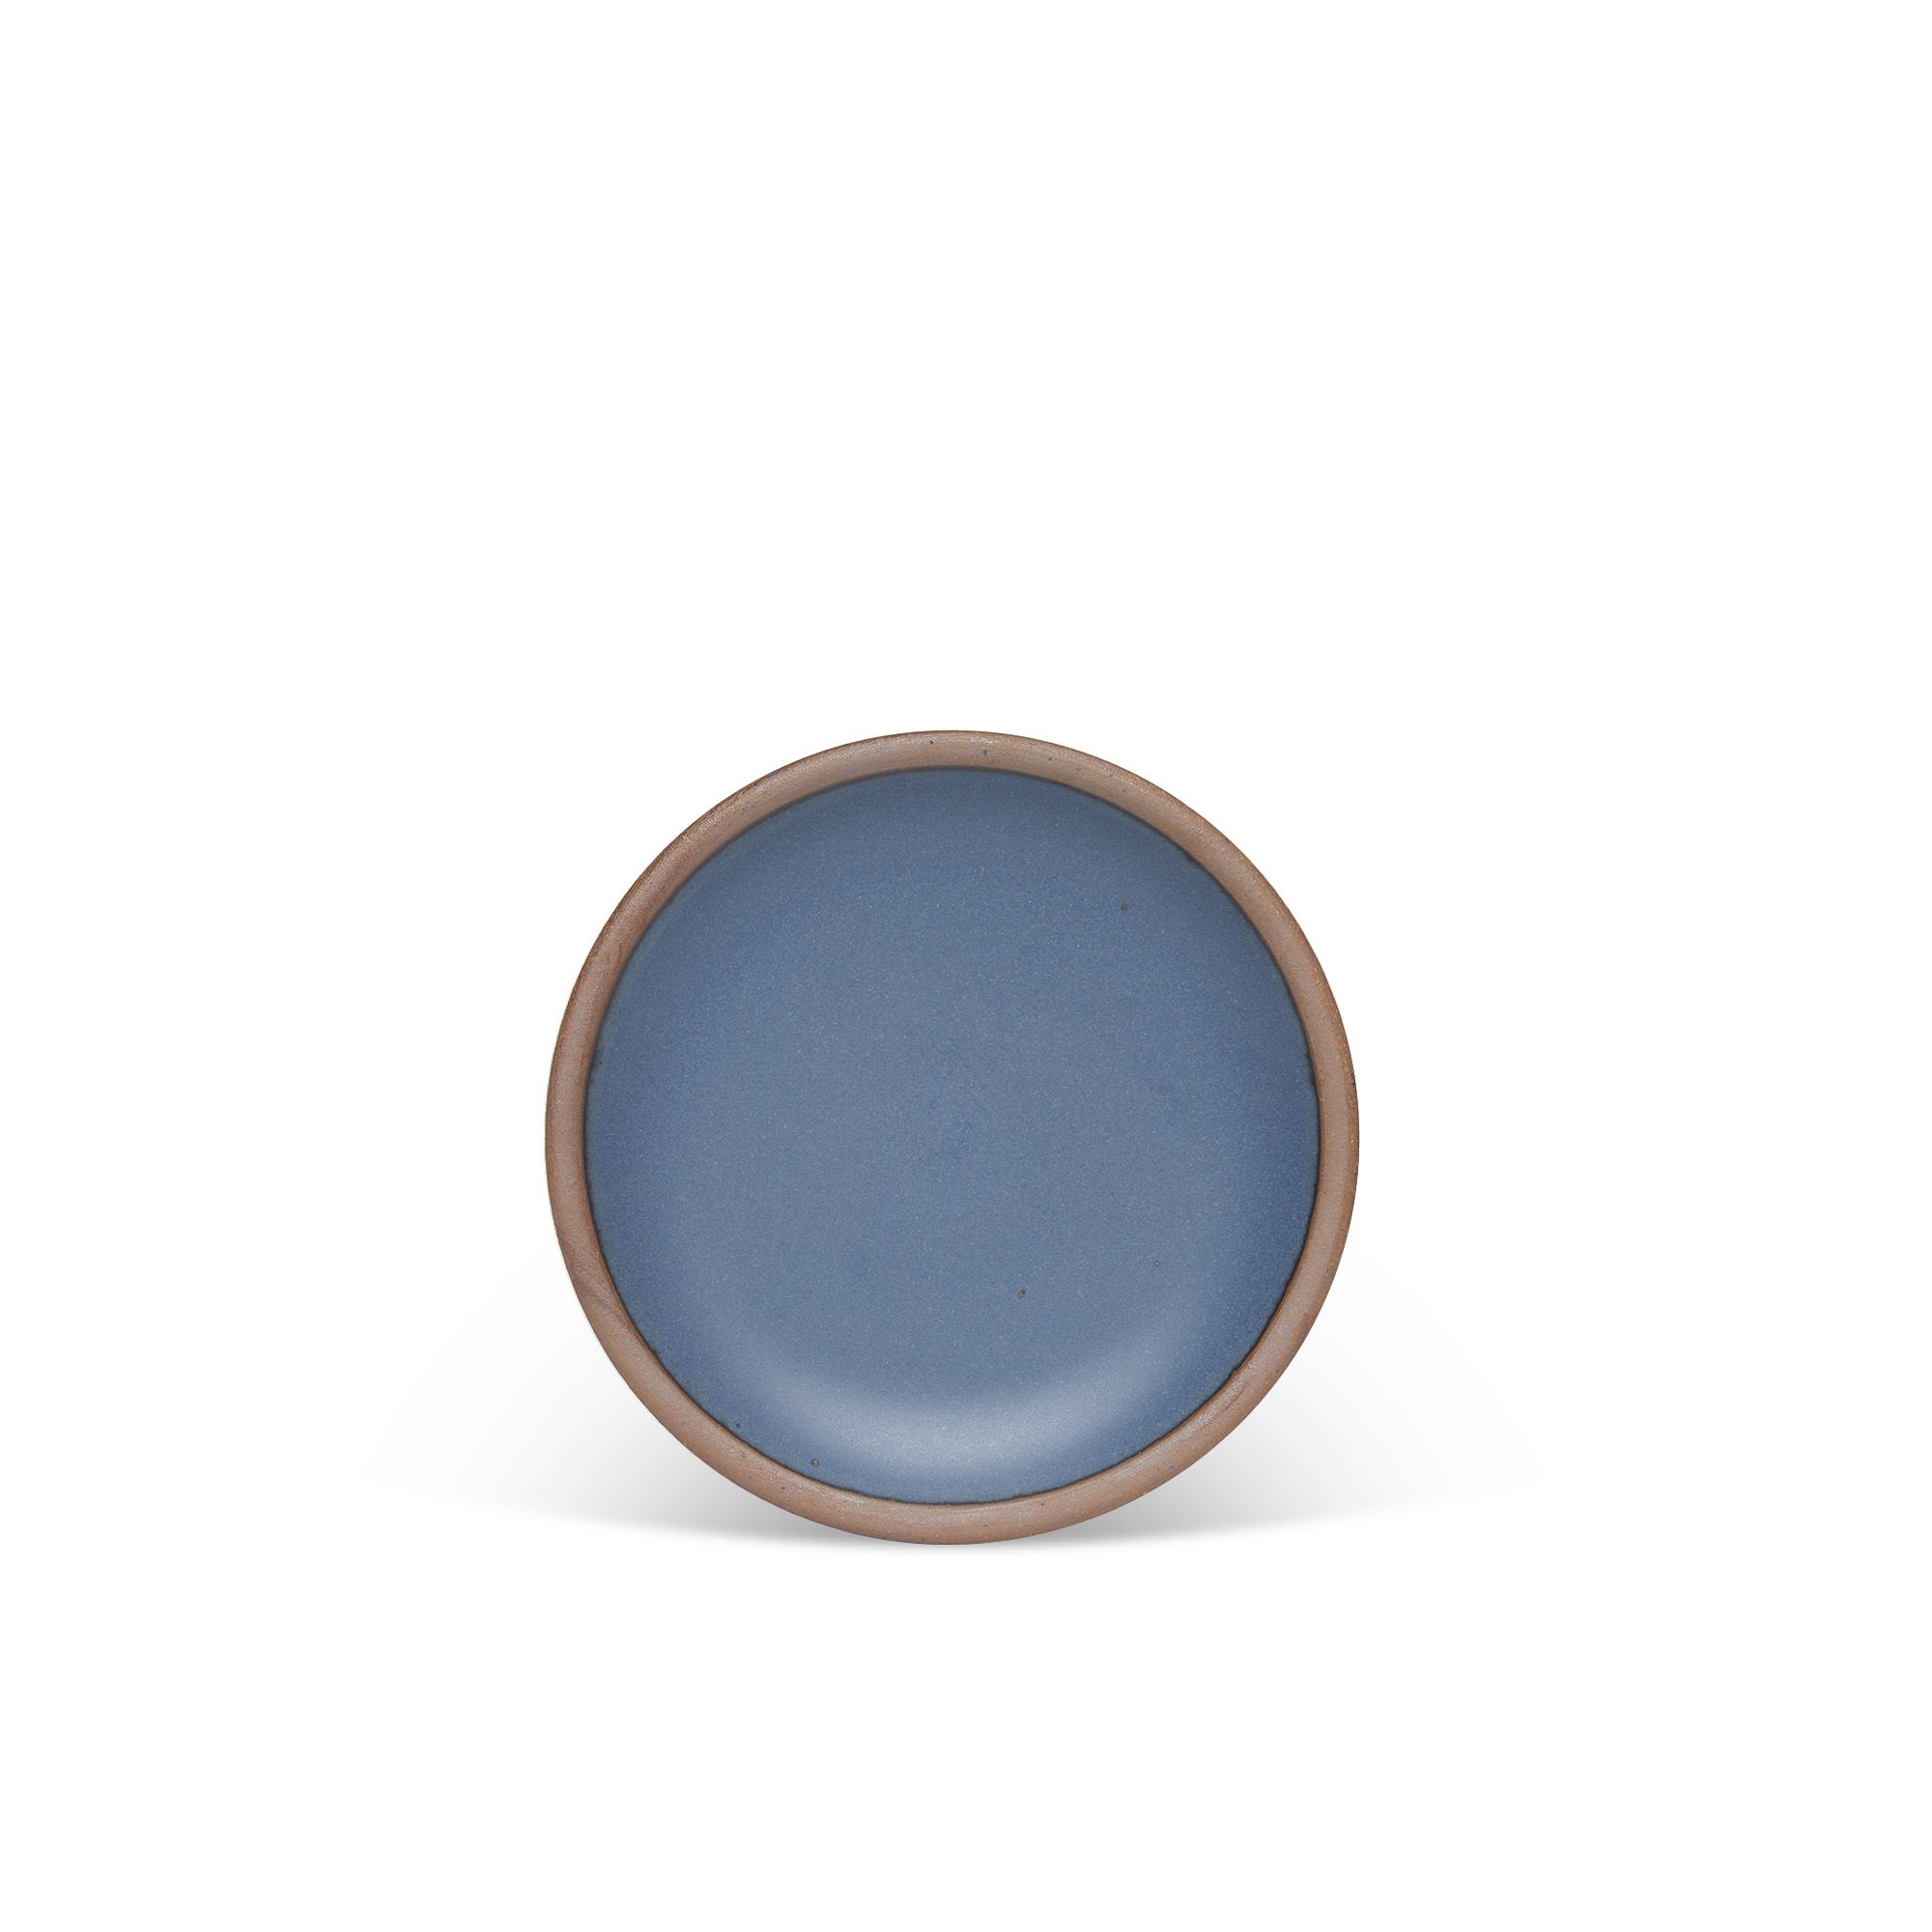 A dessert sized ceramic plate in a toned-down navy color featuring iron speckles and an unglazed rim.